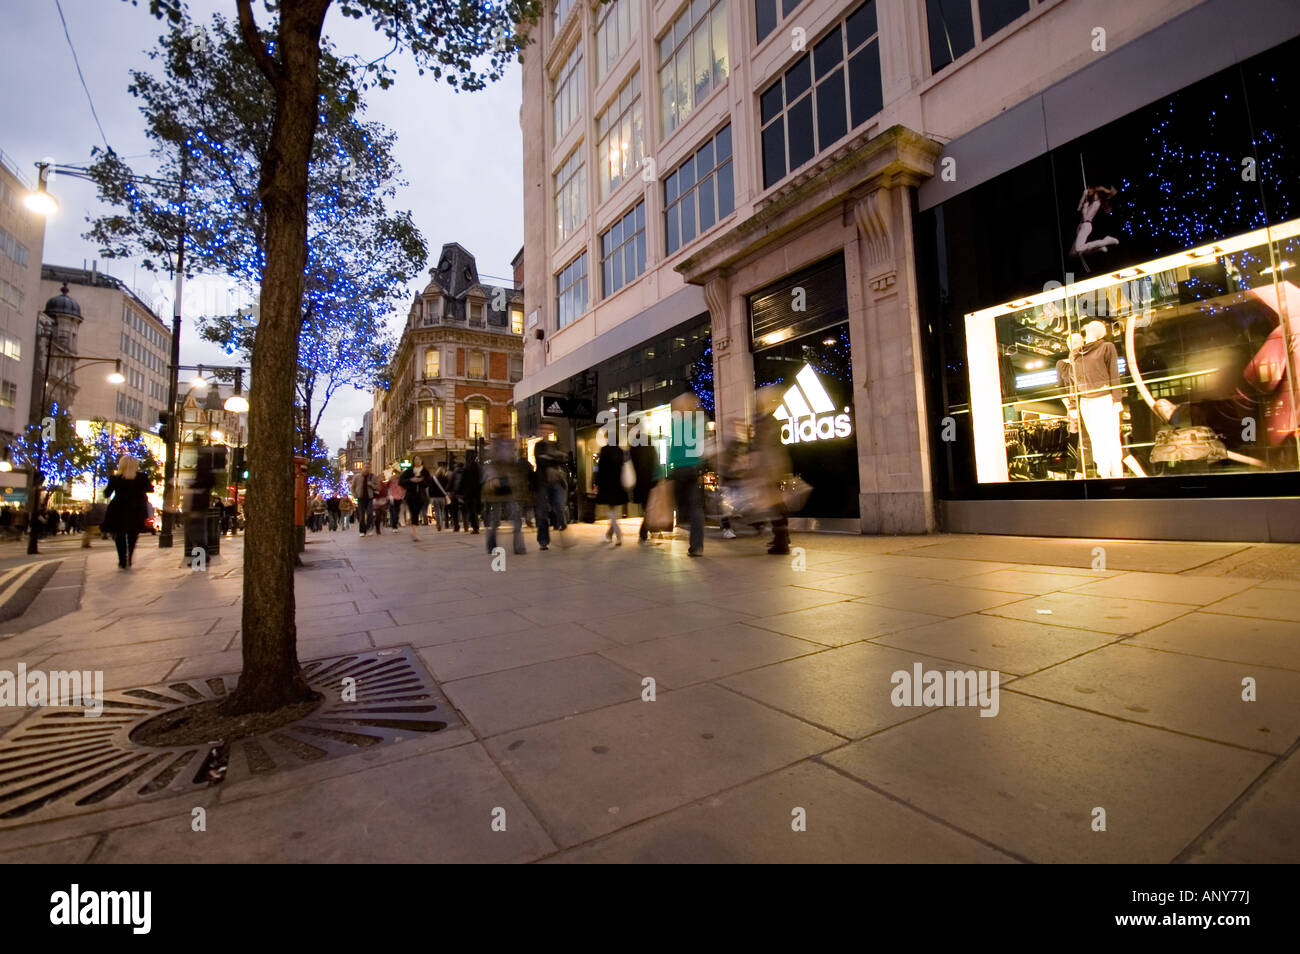 adidas store in oxford street,christmas decoration light at evening london  Stock Photo - Alamy